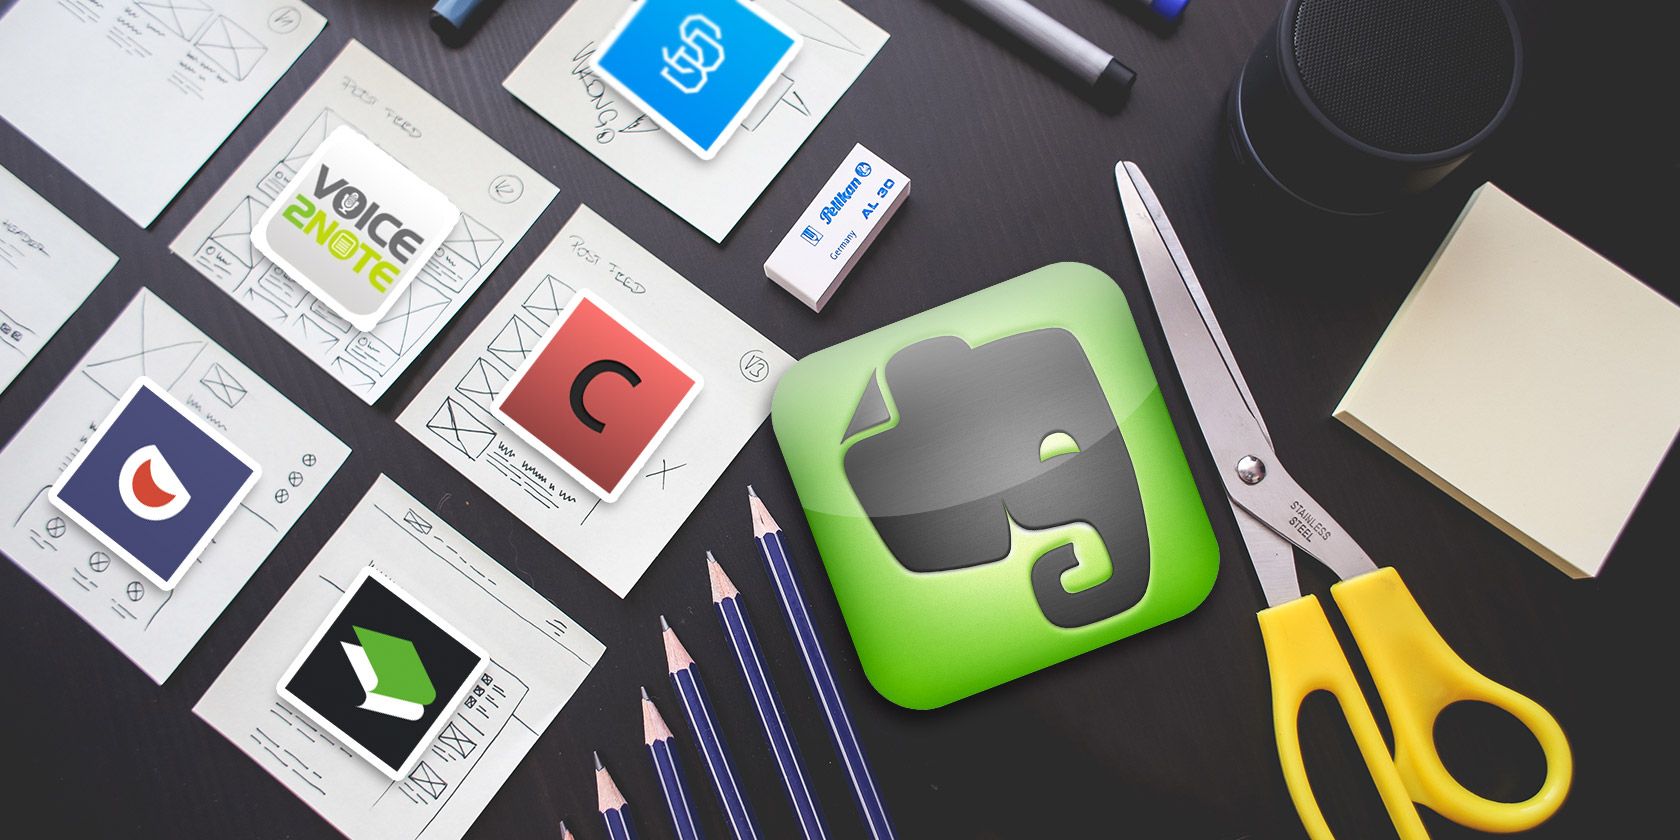 evernote-apps